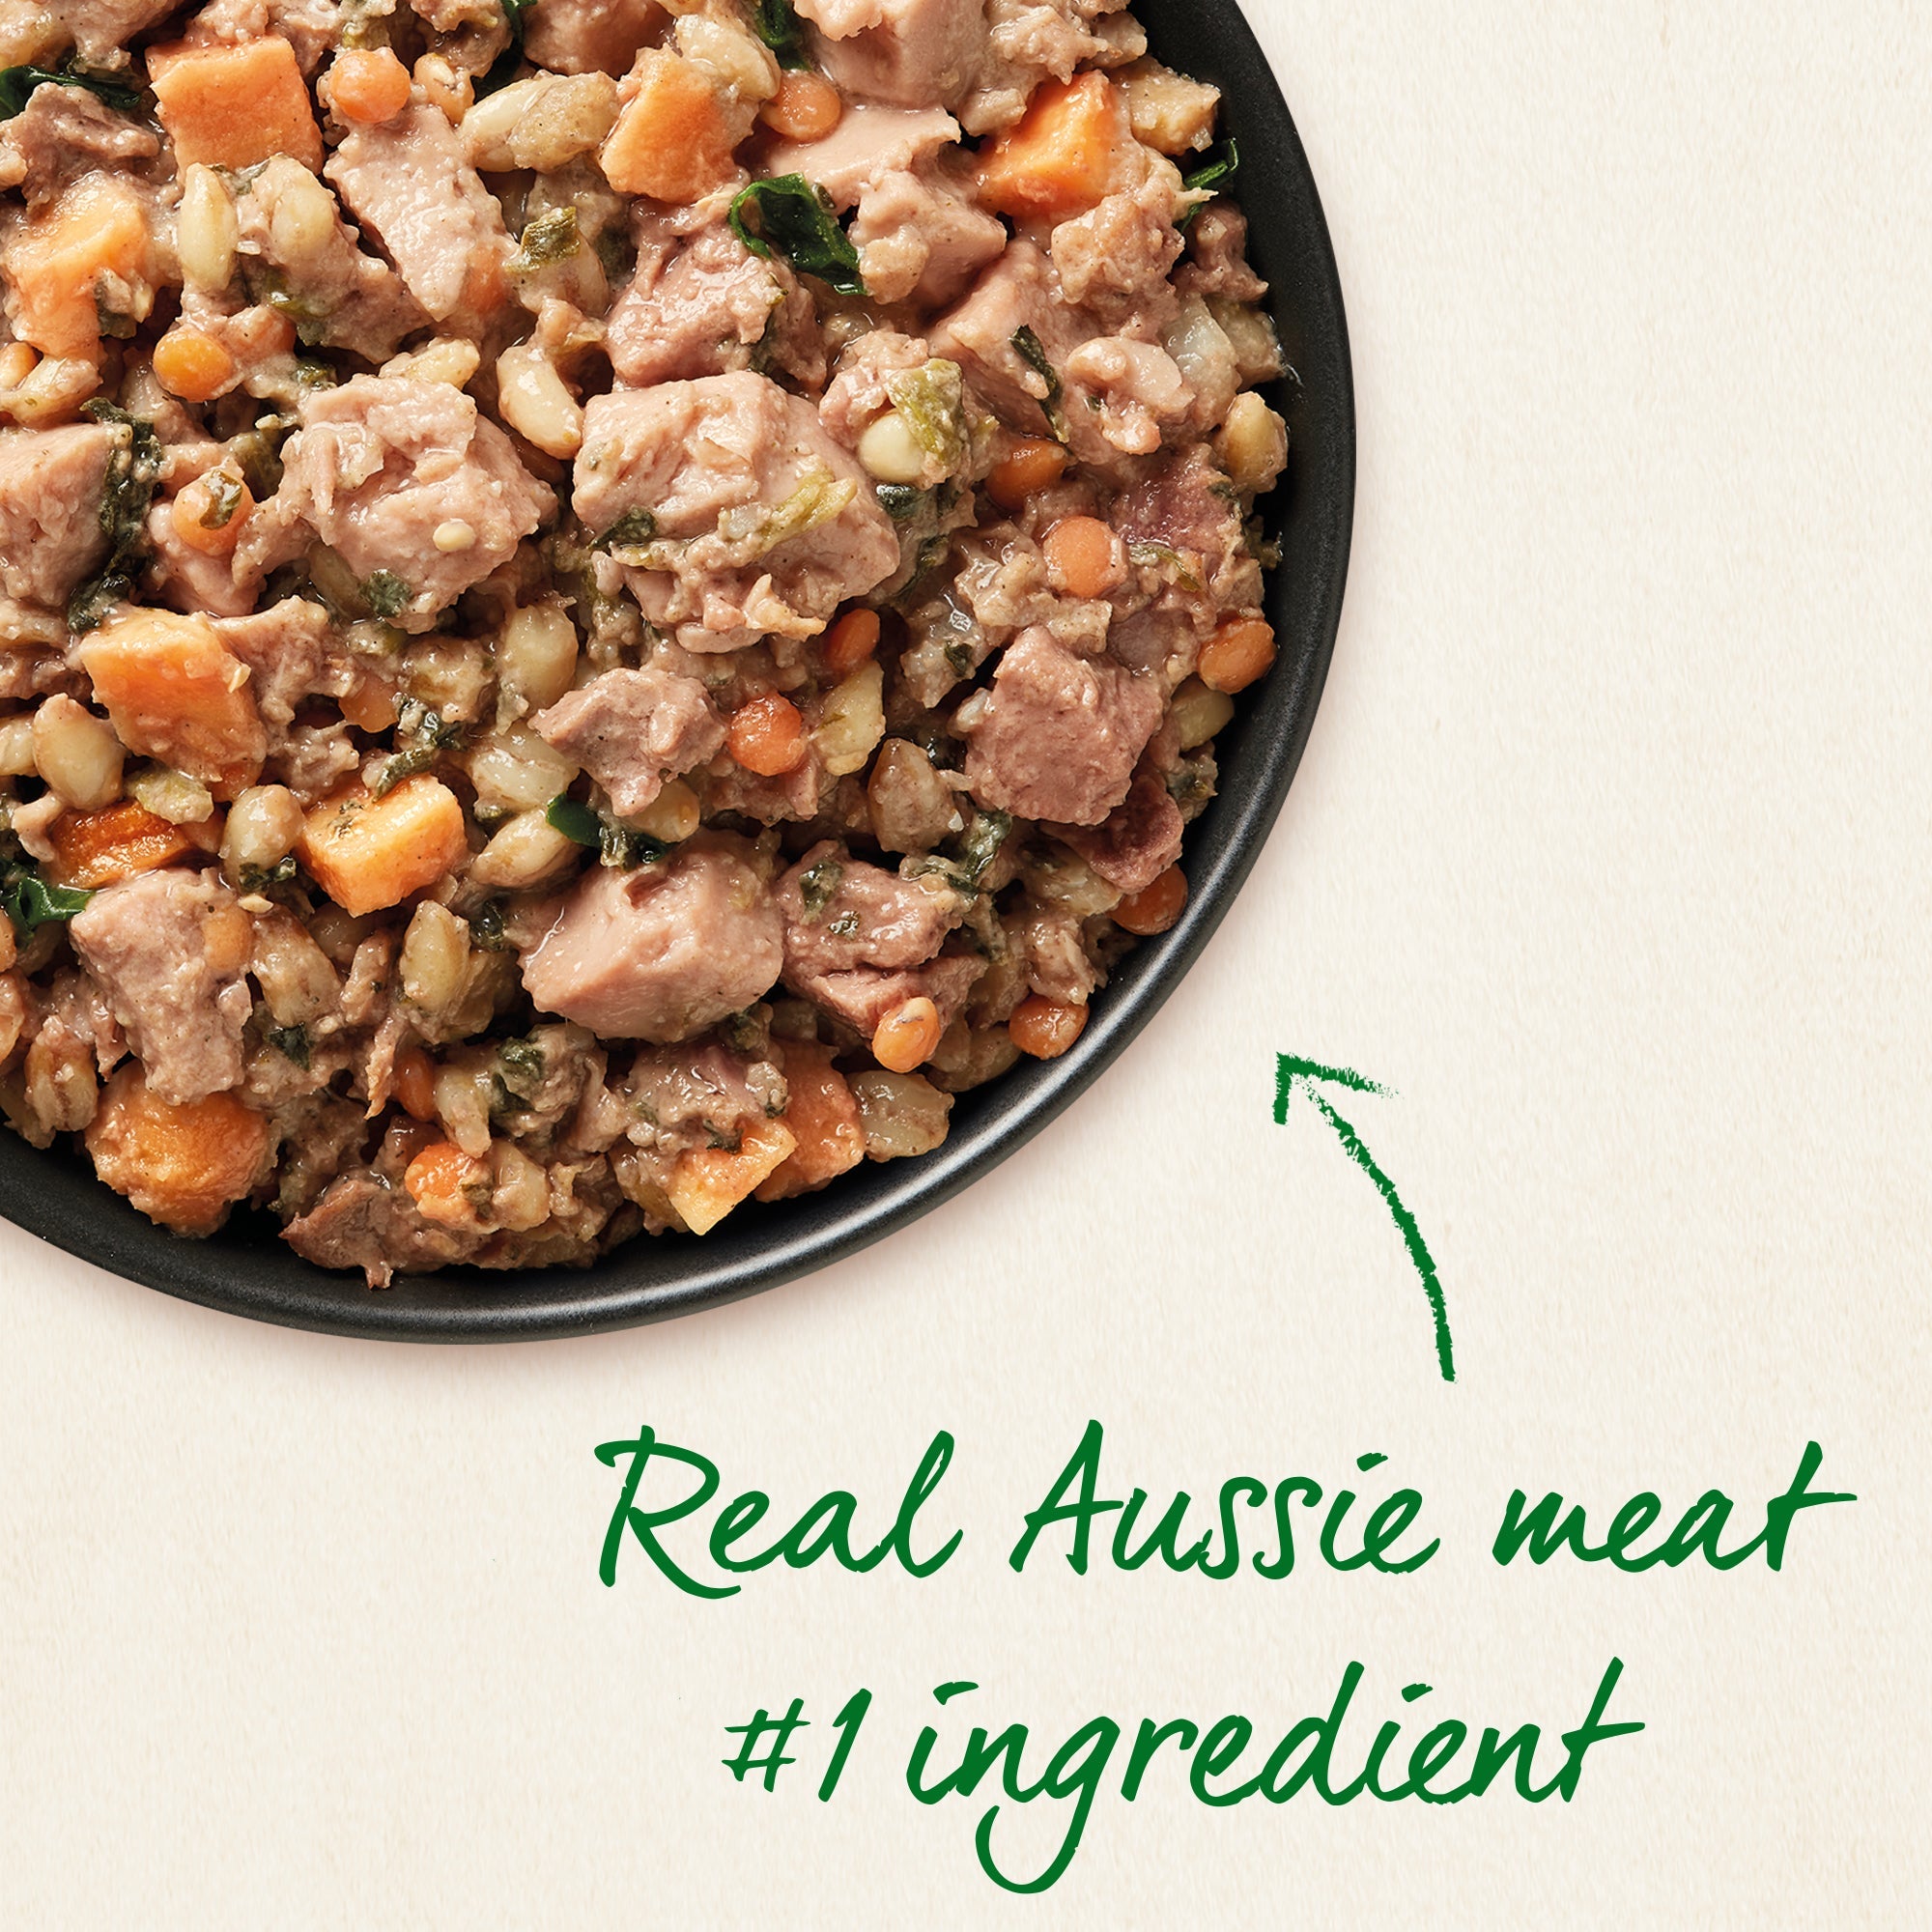 Nature's Gift Slow Cooked Chicken, Lentils, Sweet Potato & Spinach 2x 220g